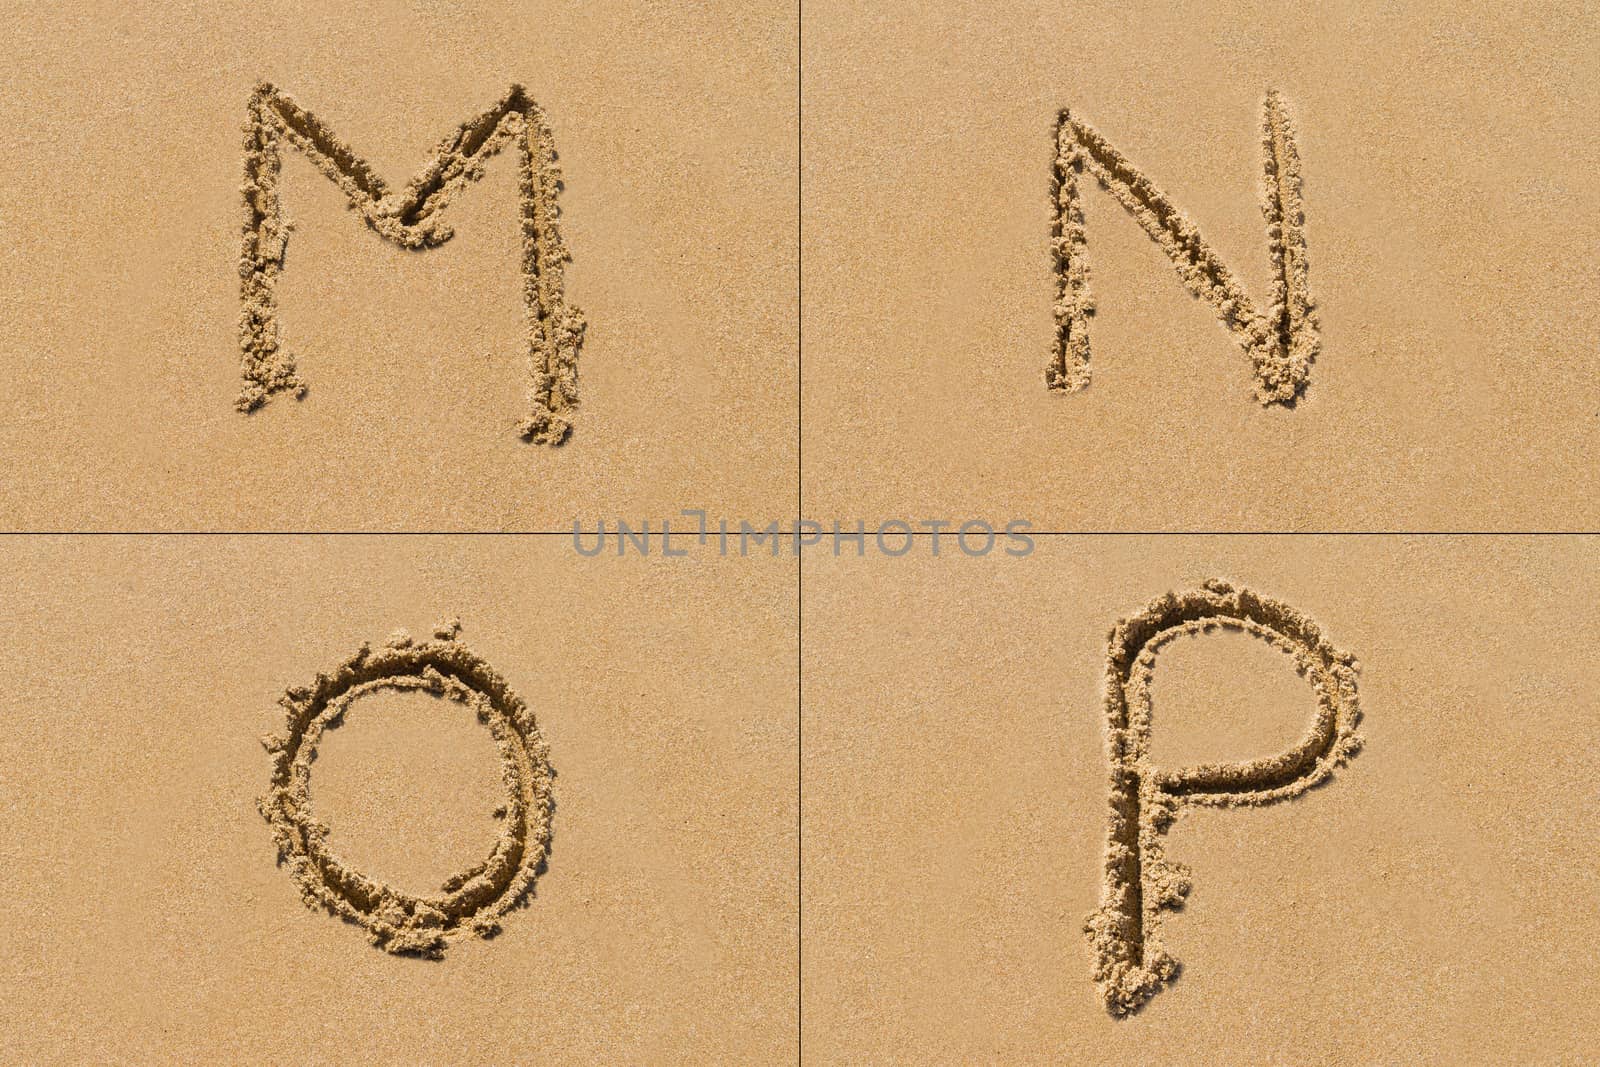 Conceptual set of M N O P letter of the alphabet written on sand with upper case.